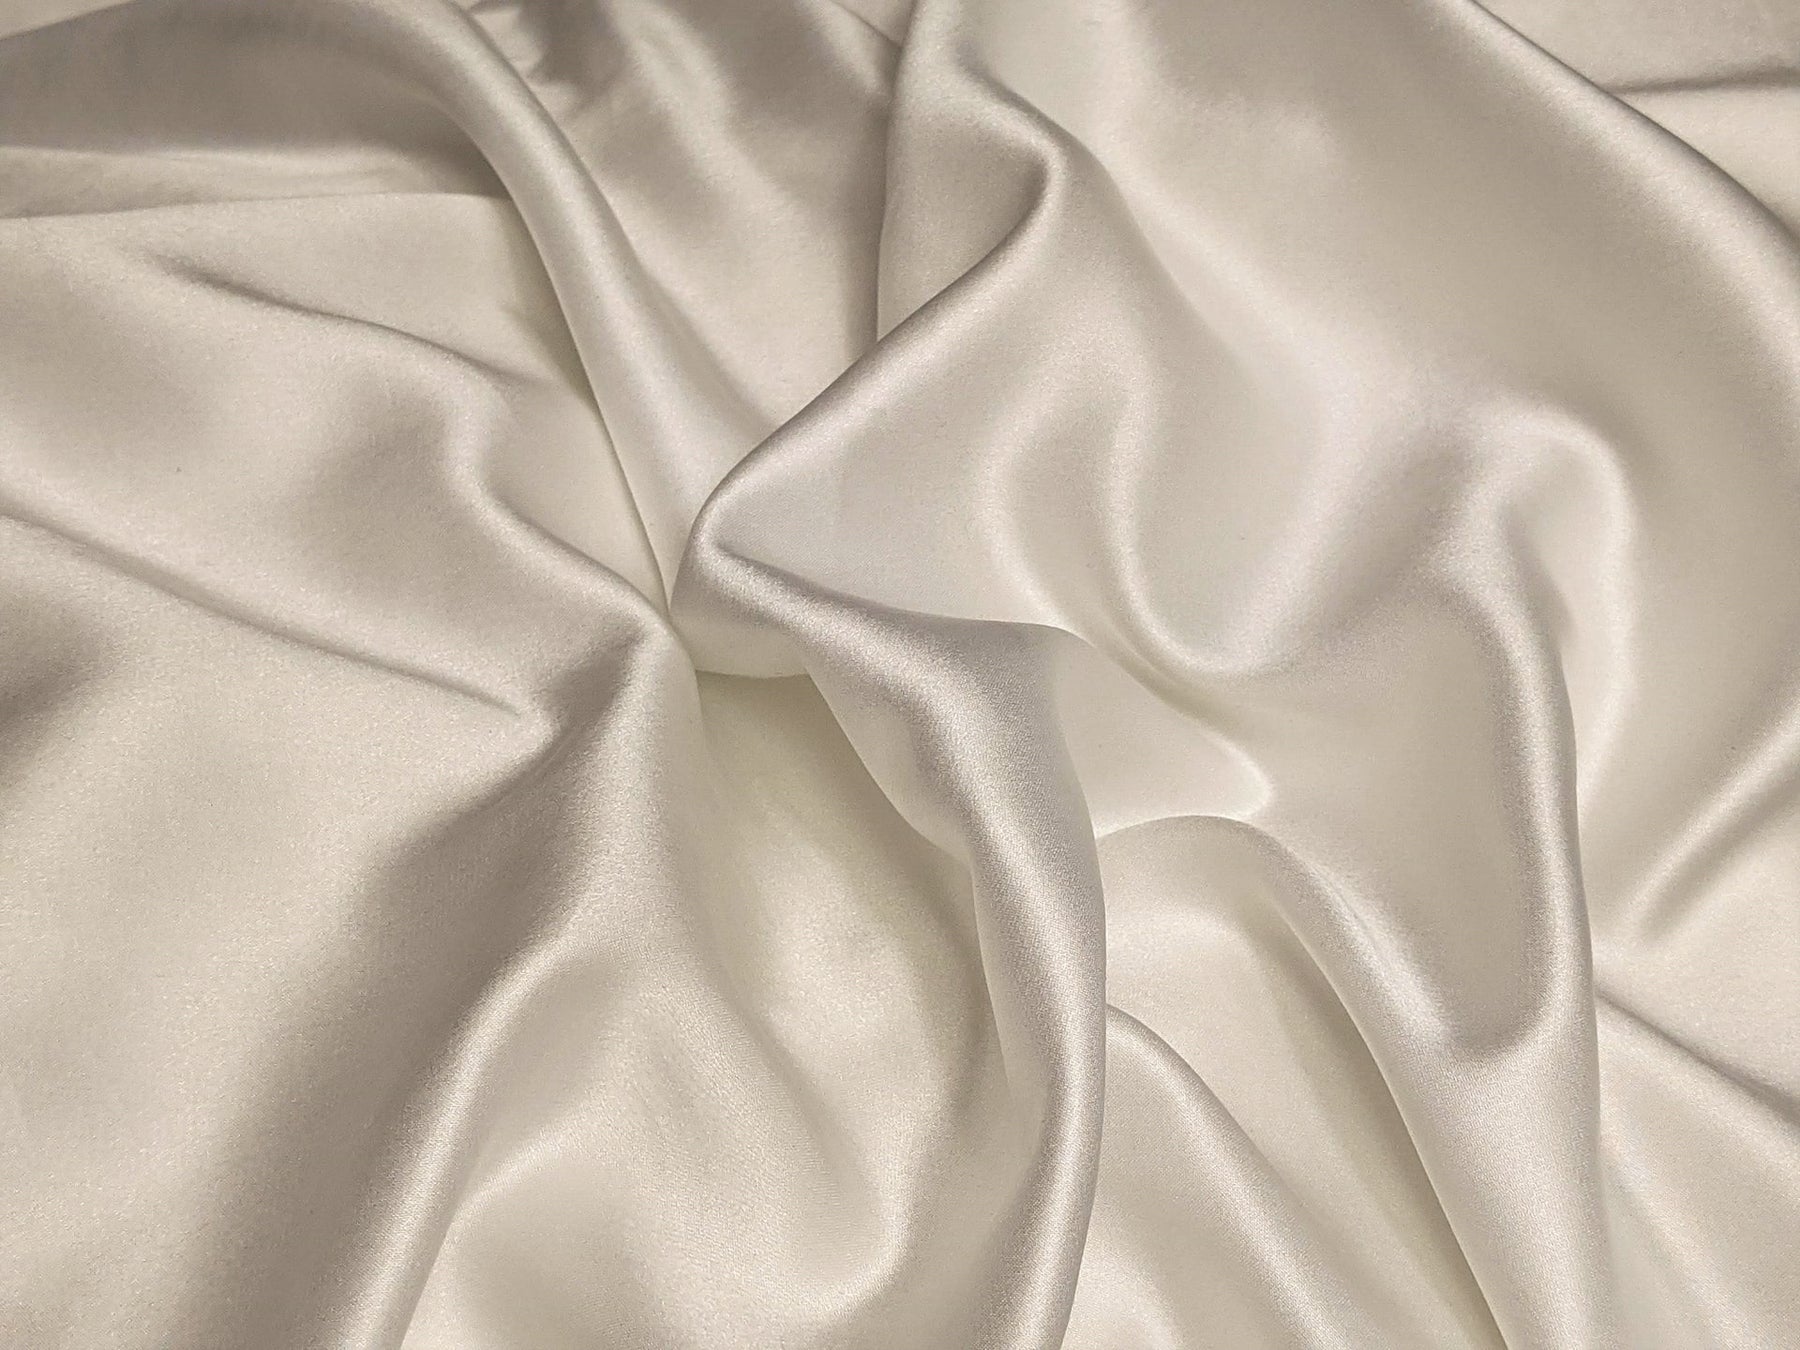 Hybrid Botanic Silk Bedsheets: An Remedy For Allergy Prone Sleepers